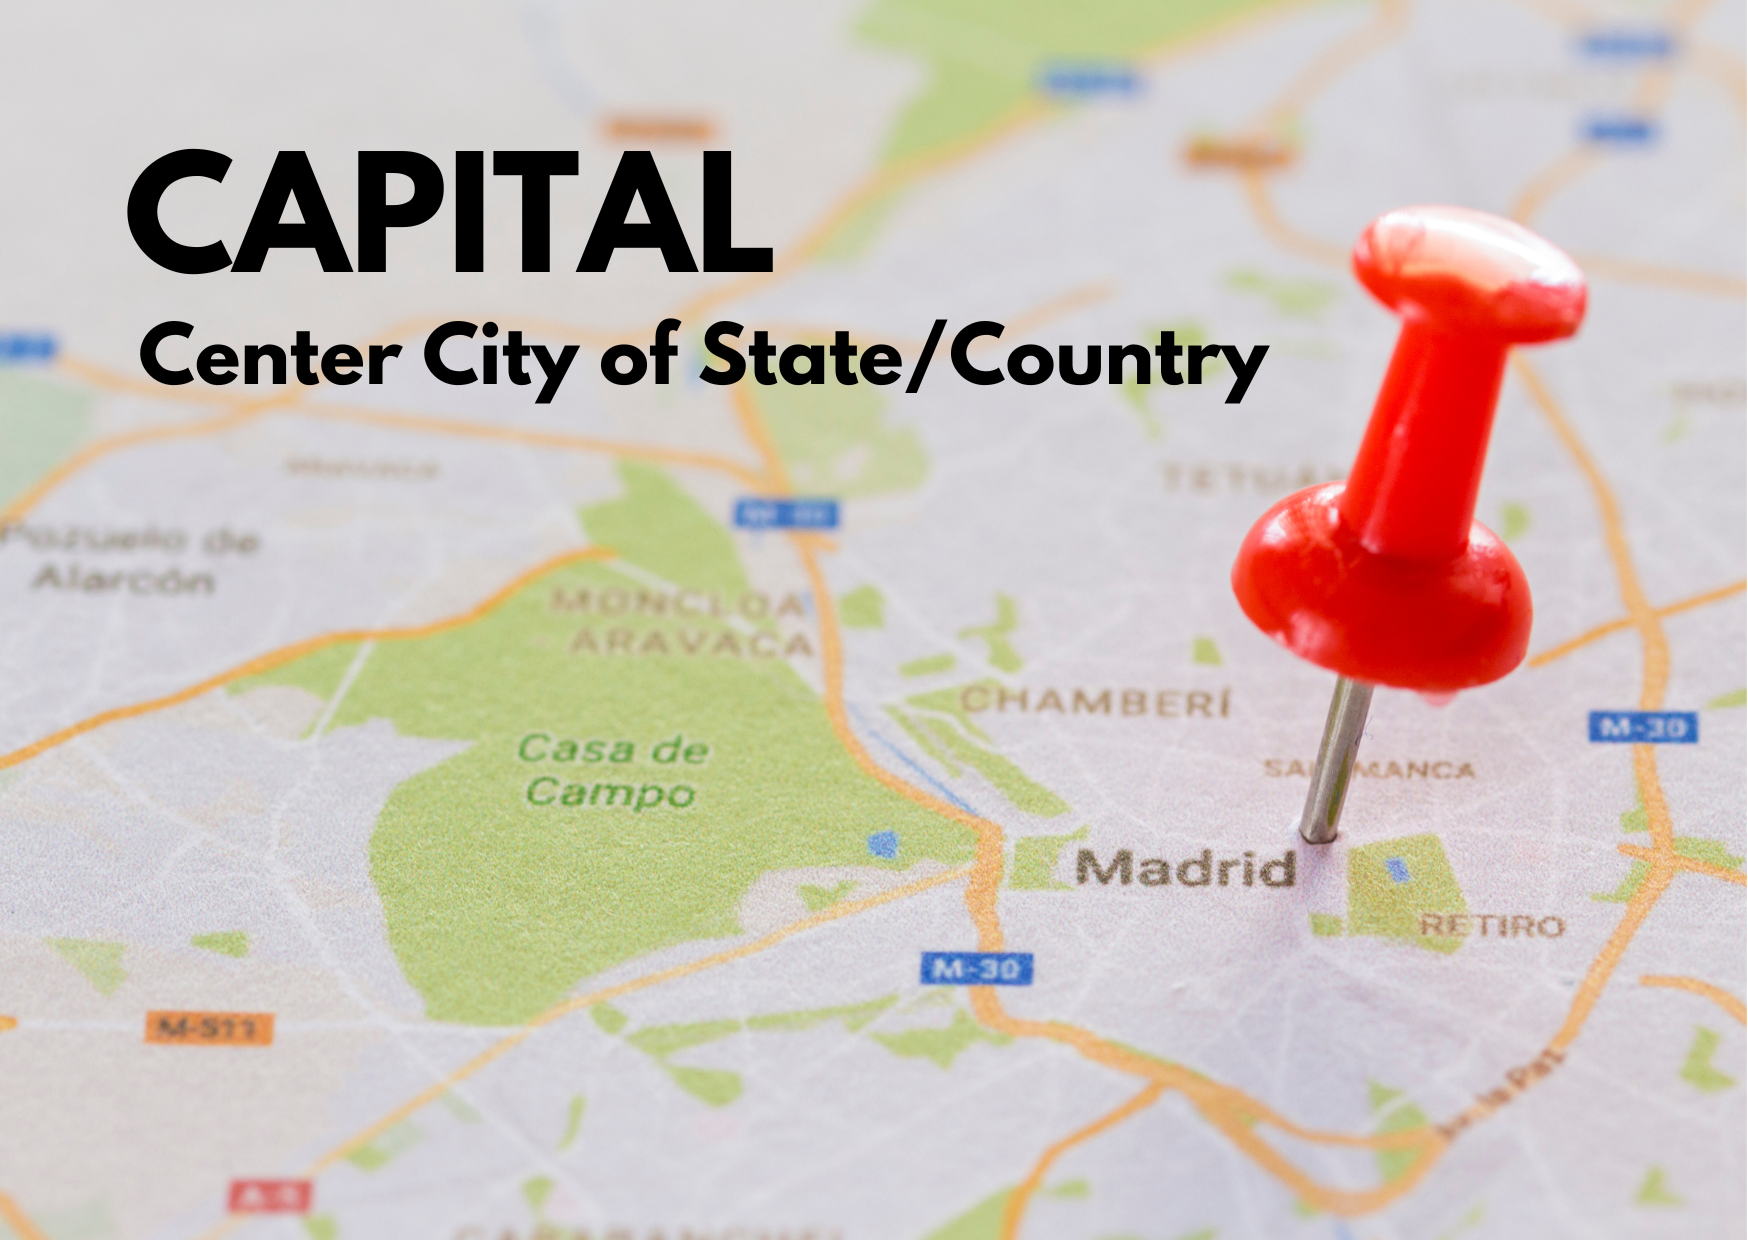 A picture of a map with a red pin next to Madrin and the caption: "Capital: Center city of state/country